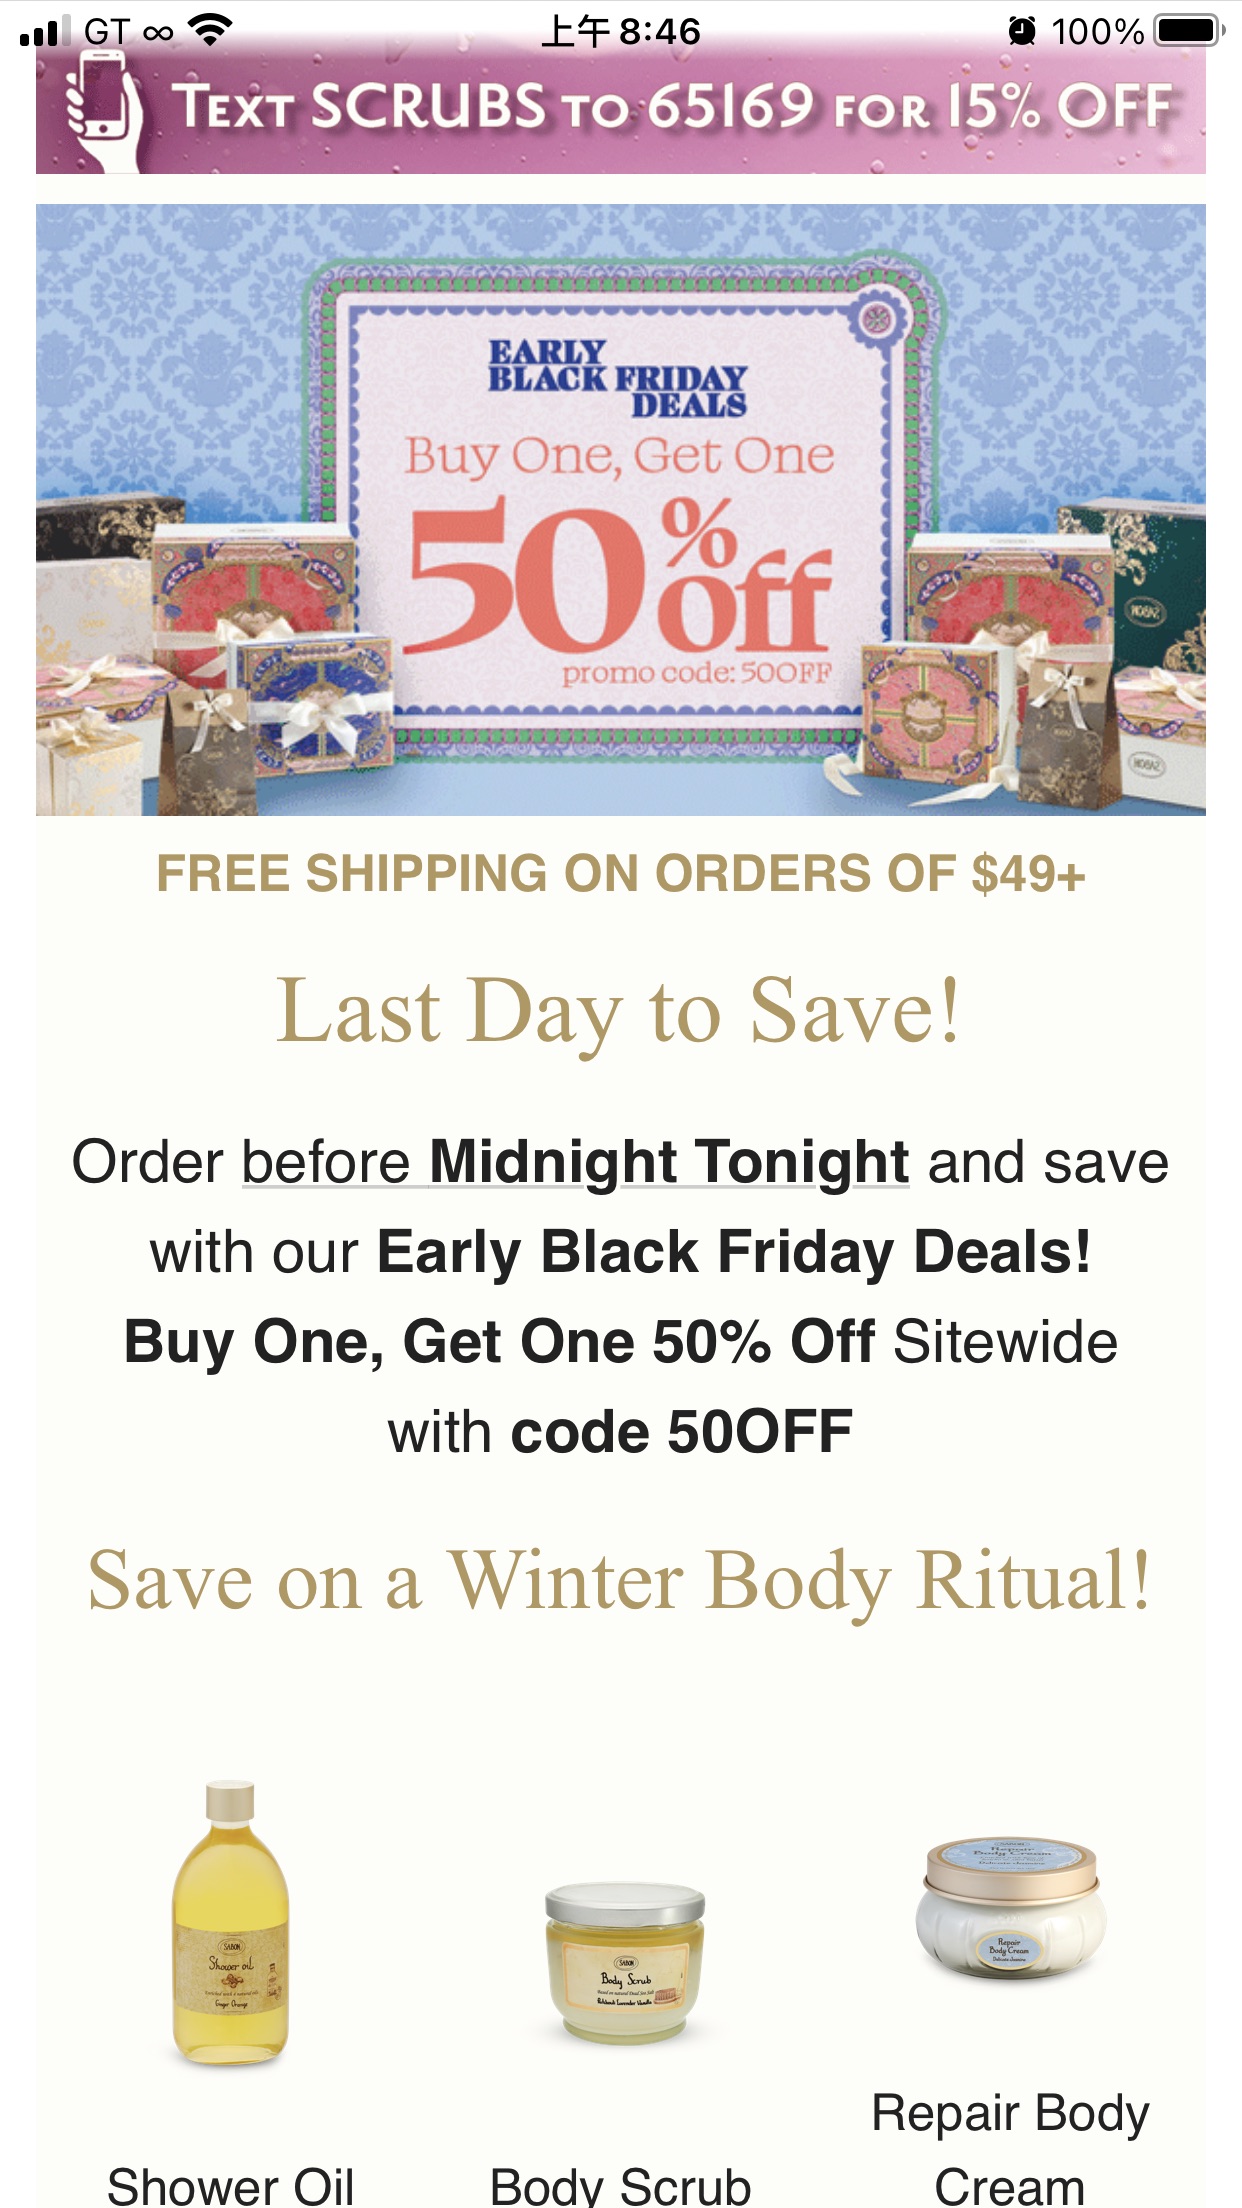 Buy One, Get One 50% Off Sitewide with code 50OFF
Save on a Winter Body Ritual